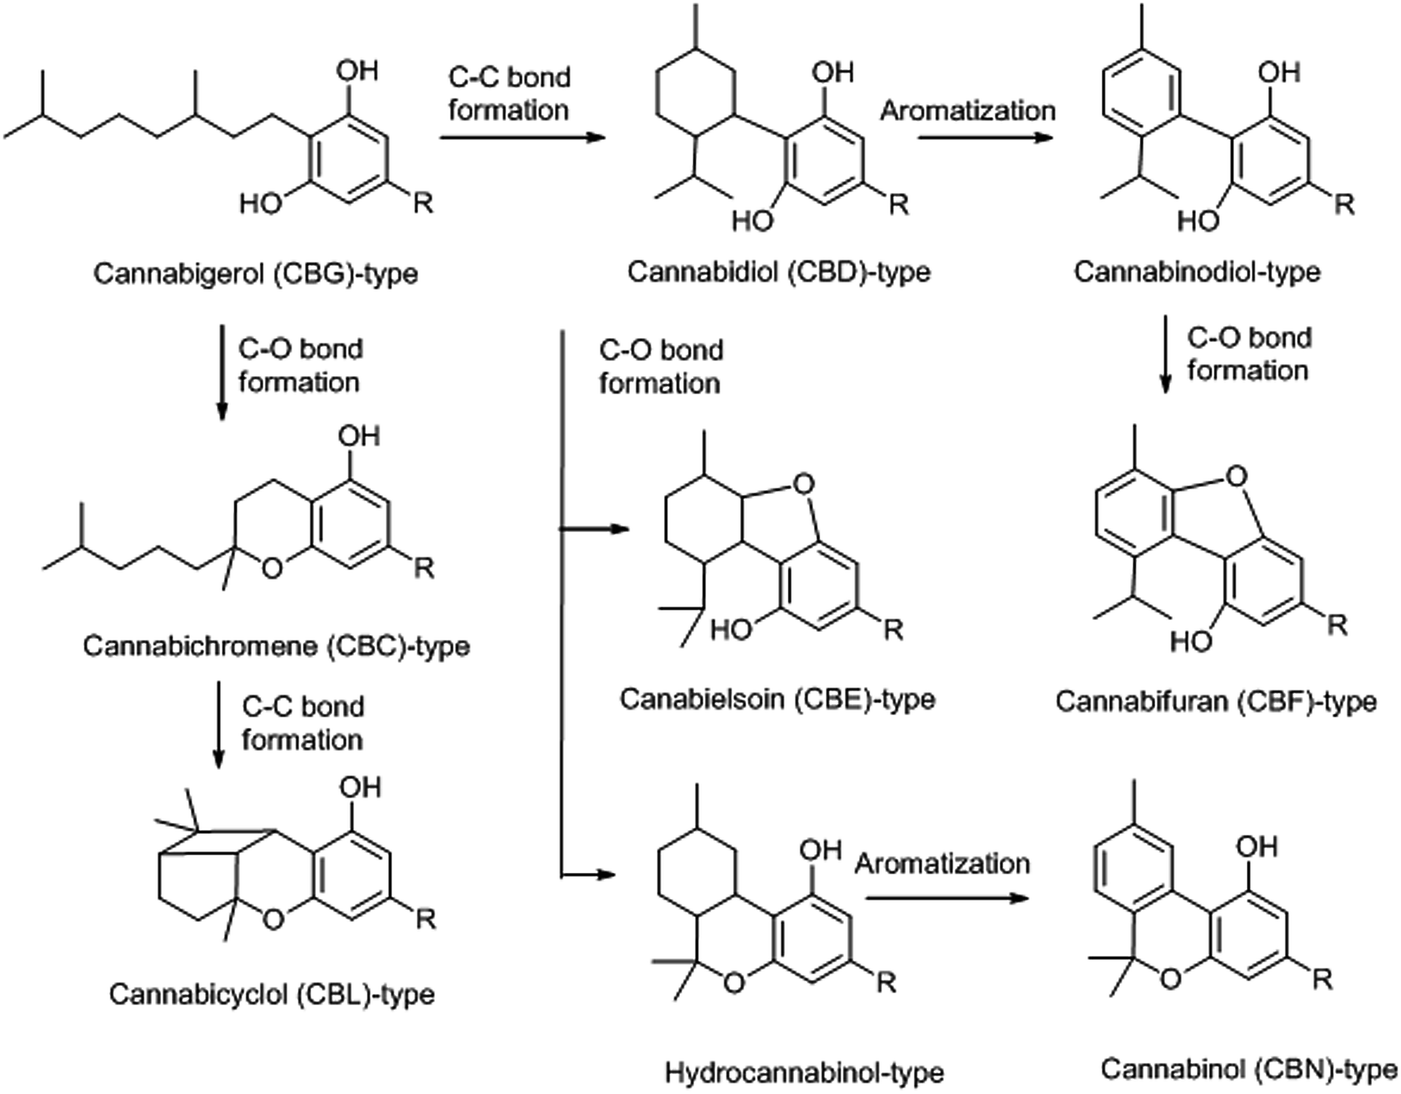 Phytocannabinoids: a unified critical inventory - Natural Product